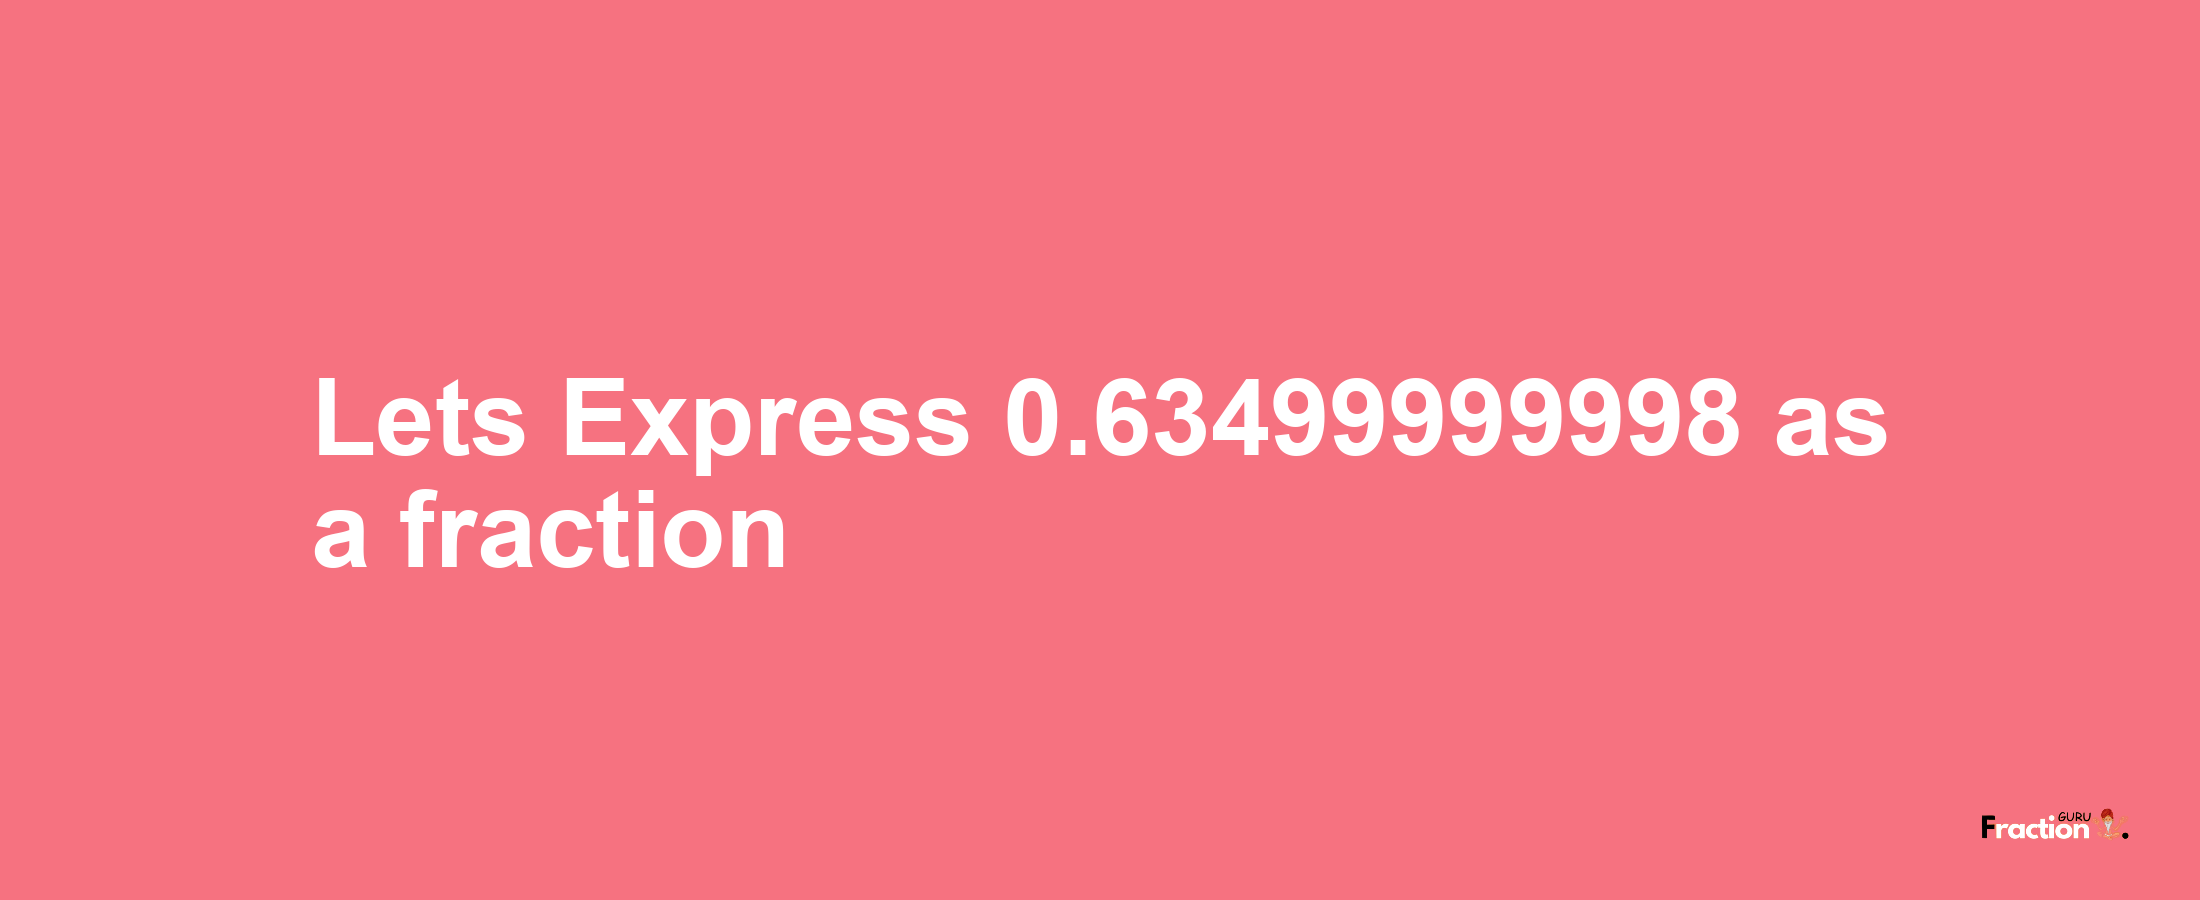 Lets Express 0.63499999998 as afraction